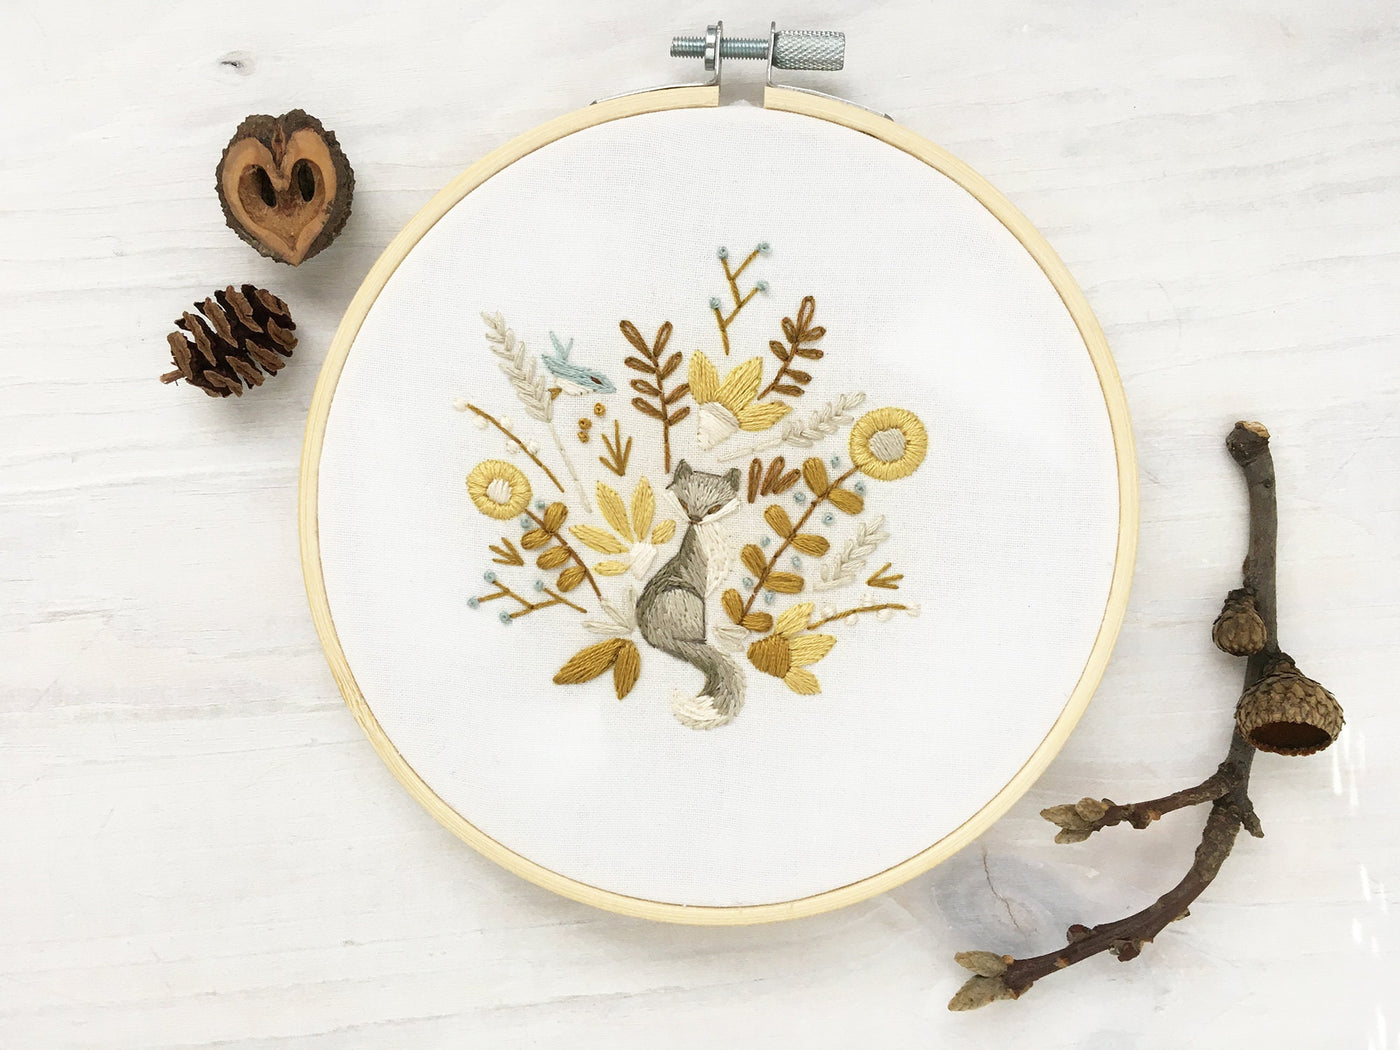 Harvest cat fox Hand Embroidery Pattern